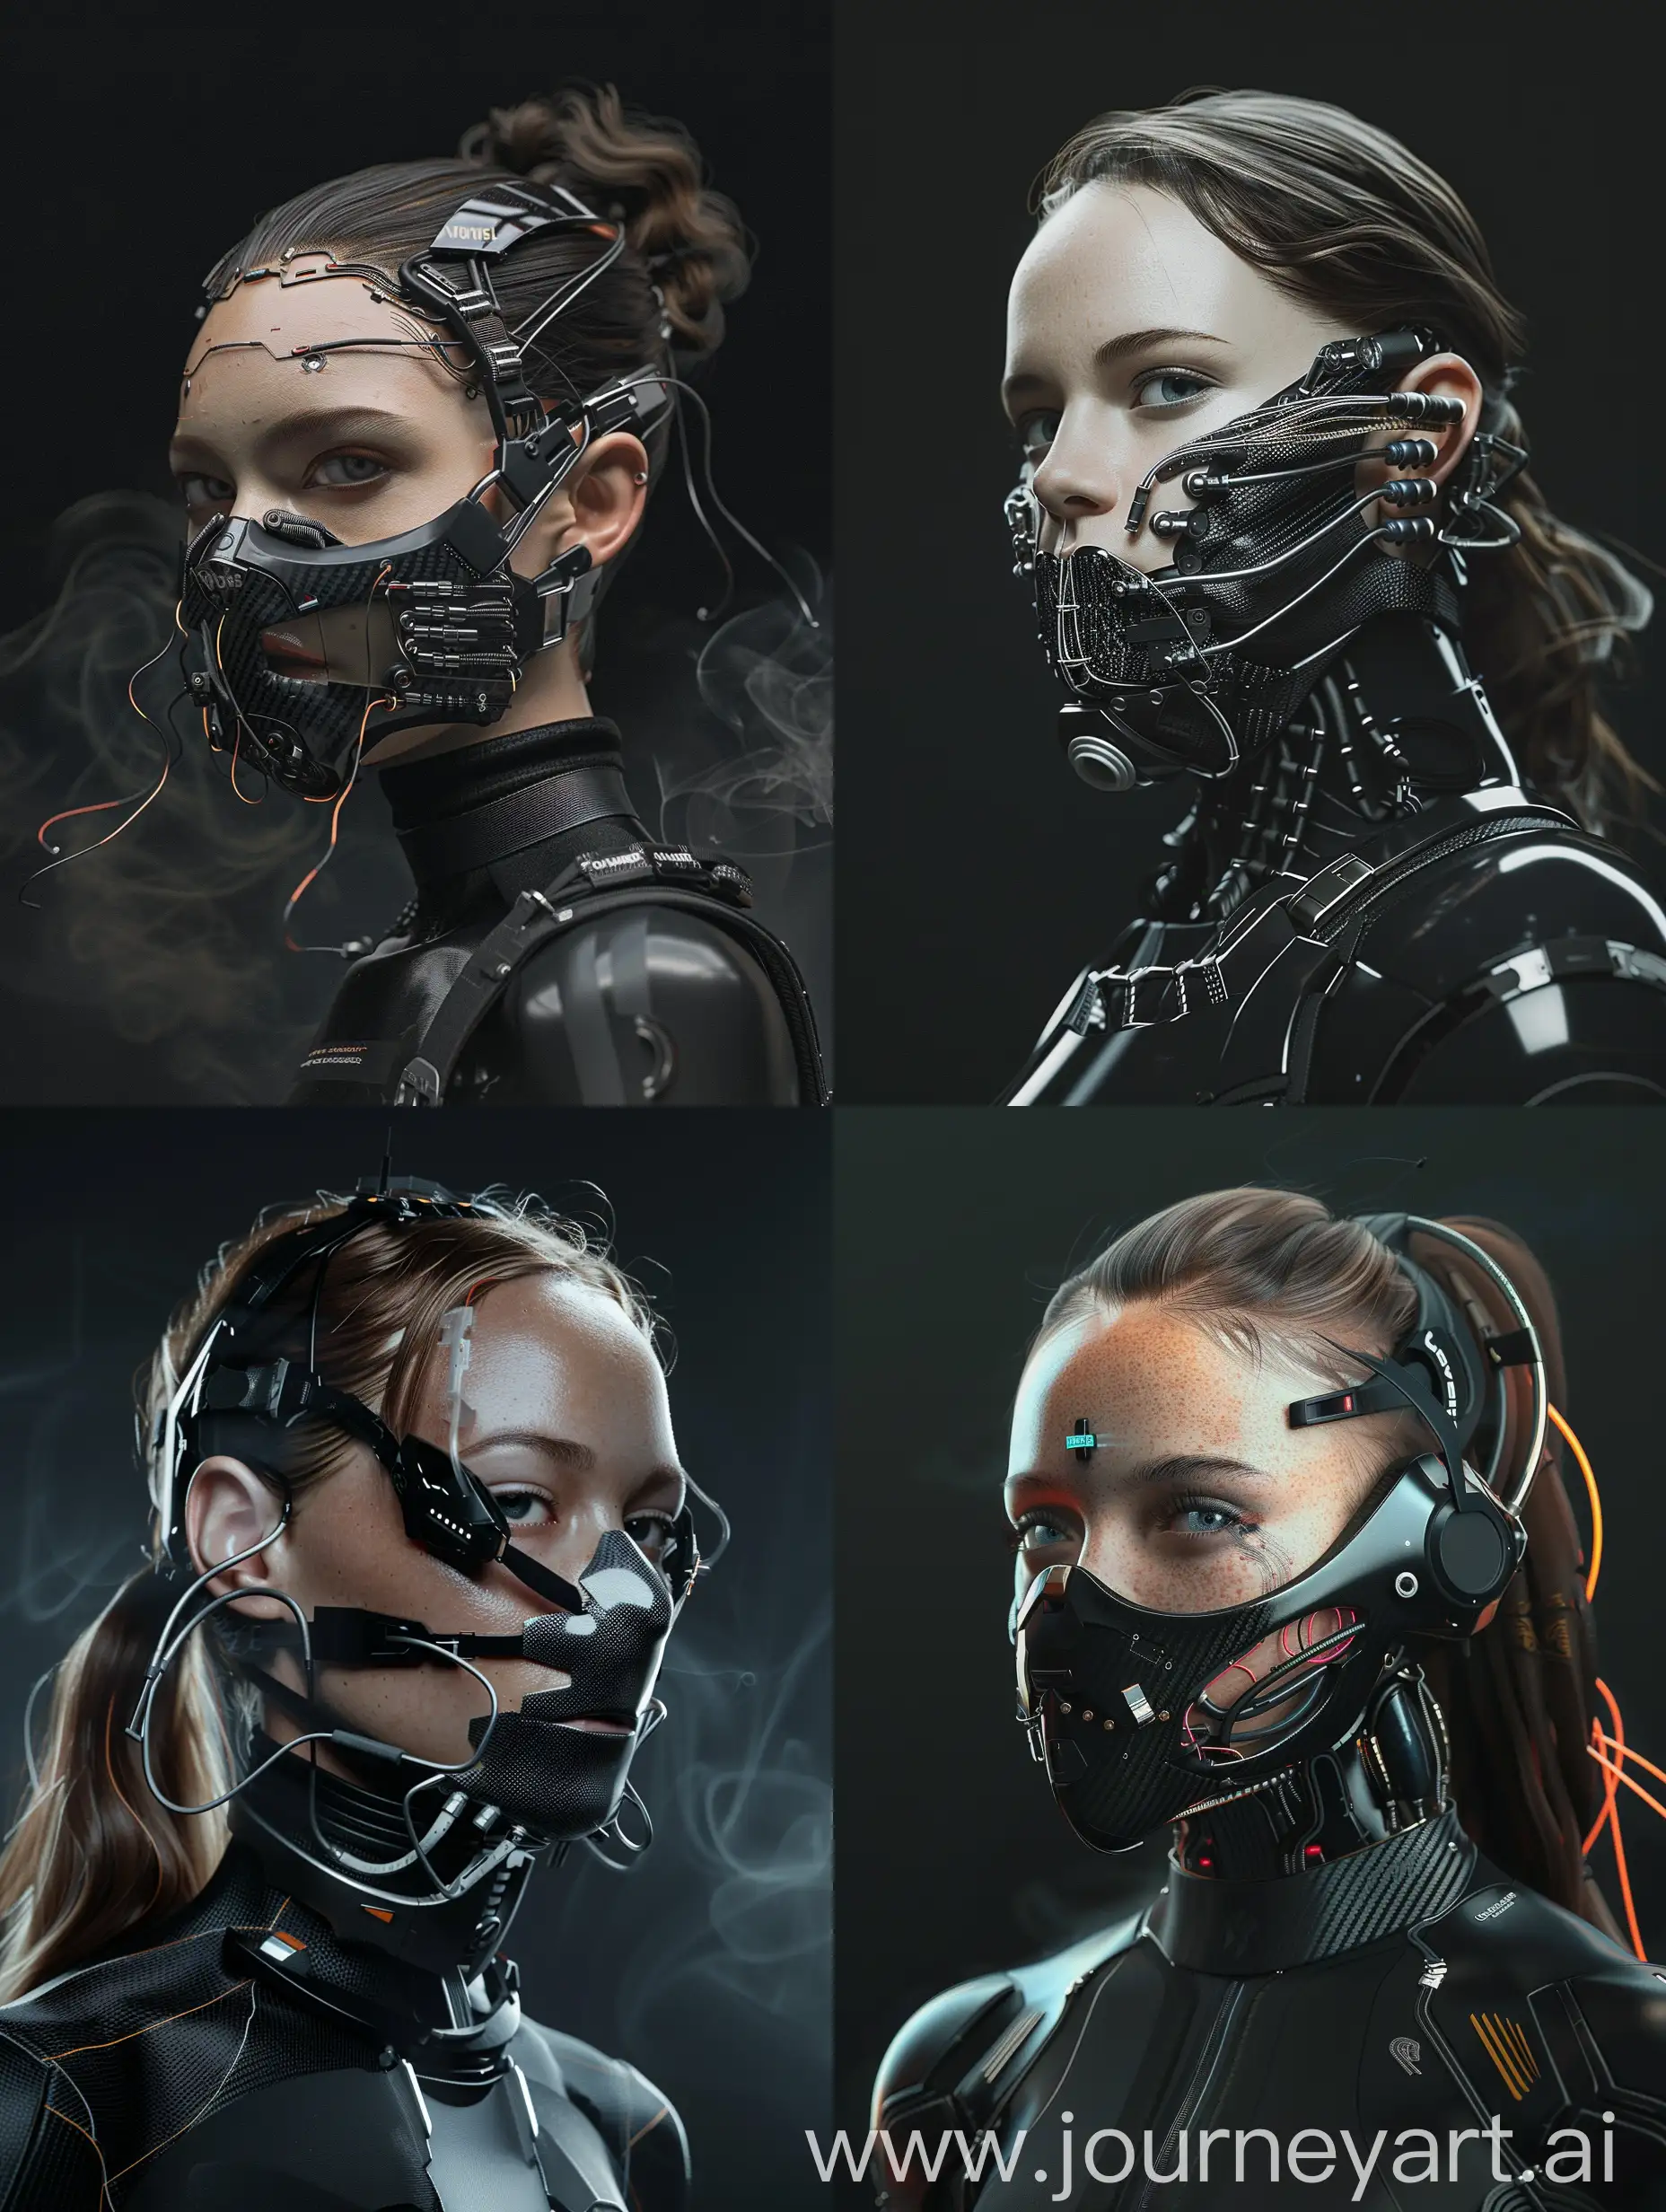 Against a sleek black backdrop, witness the captivating presence of a Beautiful characther adorned with a cybernetic mouth-covering mask. It seamlessly merges cutting-edge technology with intricate details, showcasing carbon fiber textures, sleek aluminum accents, and pulsating wires. Symbolizing the delicate equilibrium between humanity and machine, her appearance embodies the essence of a futuristic cyberpunk aesthetic, further accentuated by Oakley-inspired add-ons. With dynamic movements reminiscent of action-packed film sequences, accompanied by cinematic haze and an electric energy, she exudes an irresistible allure that commands attention